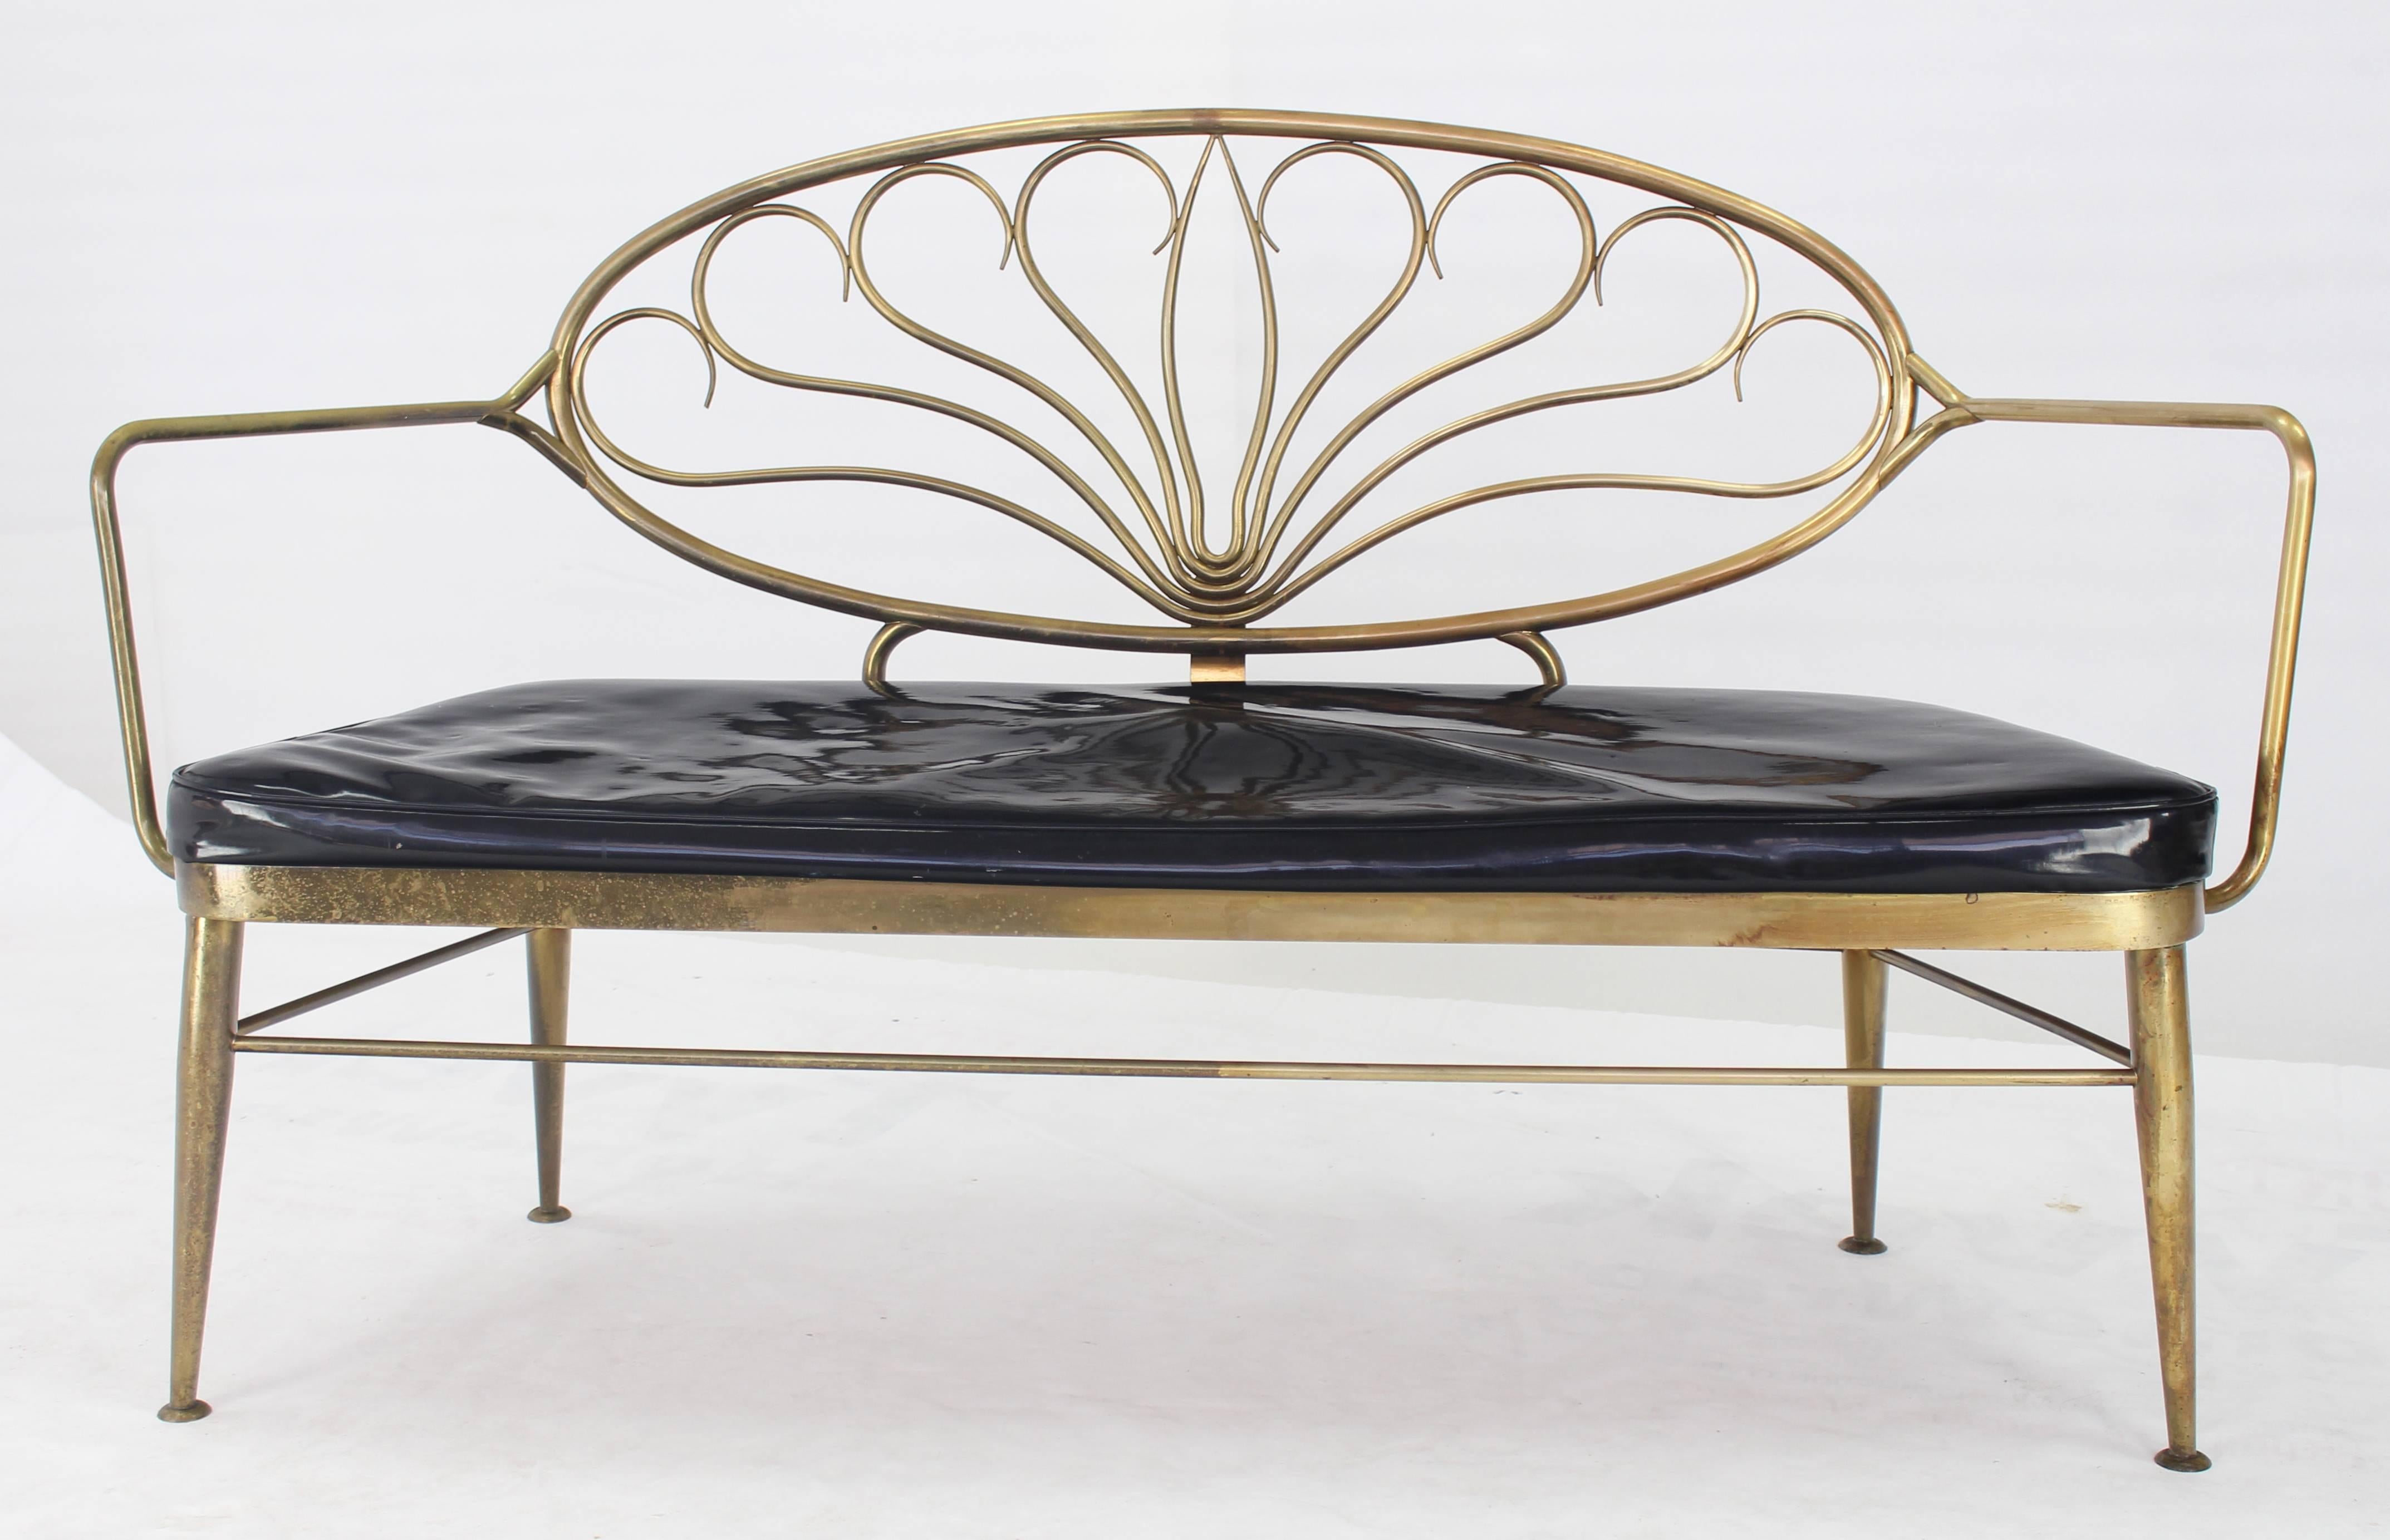 Solid Brass Scallop Back Mid-Century Loveseat Settee Bench In Good Condition For Sale In Rockaway, NJ